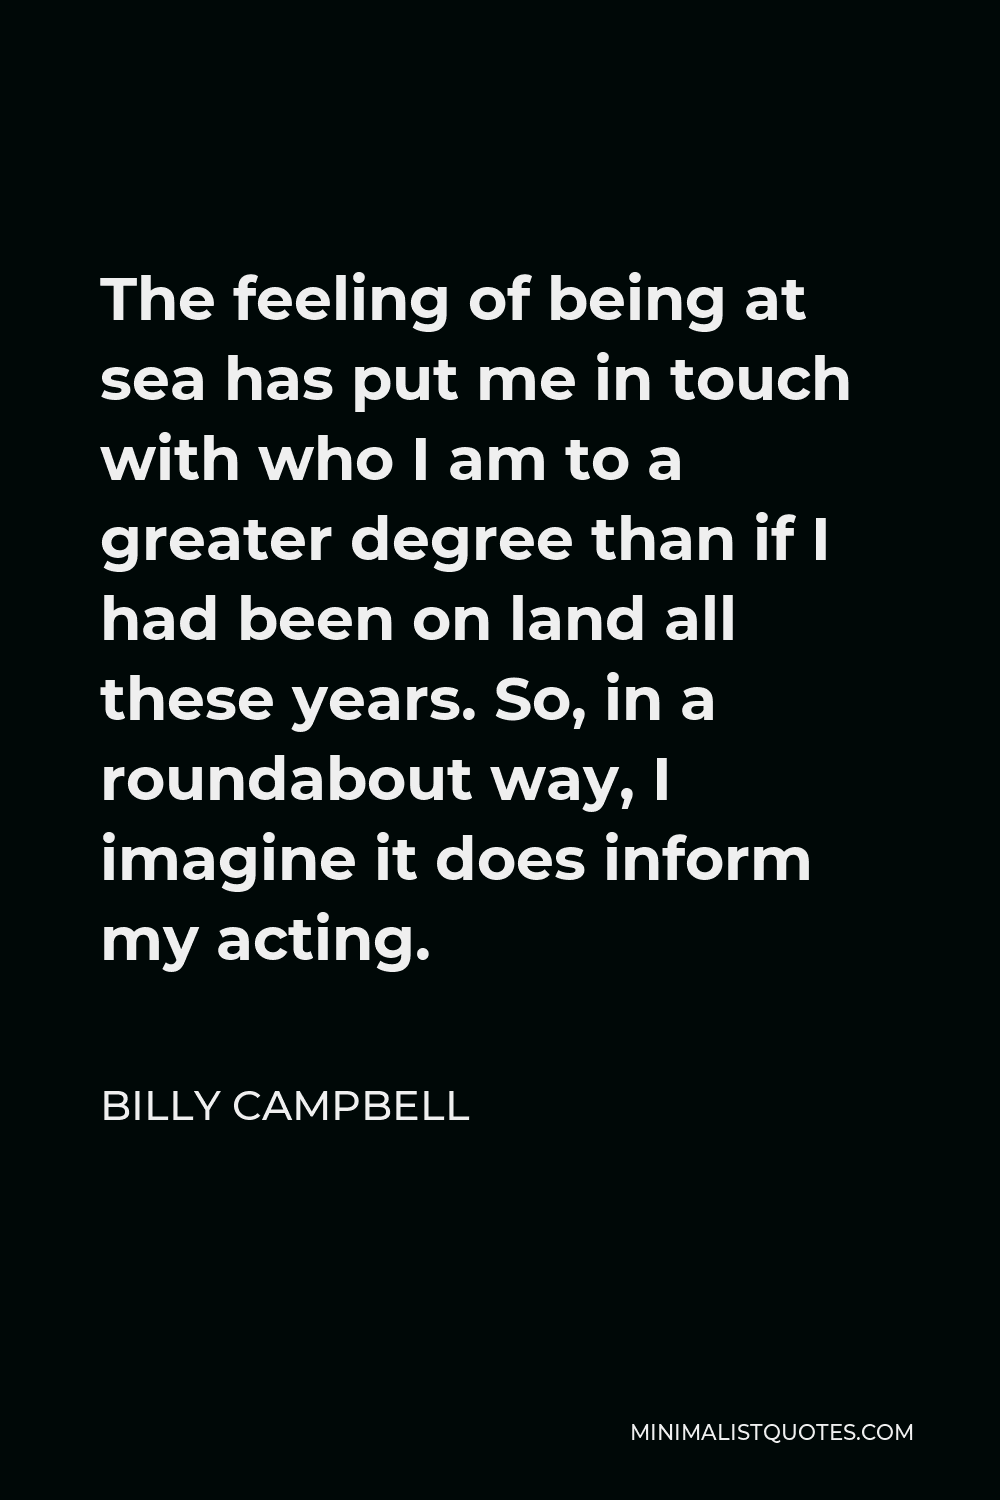 Billy Campbell Quote - The feeling of being at sea has put me in touch with who I am to a greater degree than if I had been on land all these years. So, in a roundabout way, I imagine it does inform my acting.